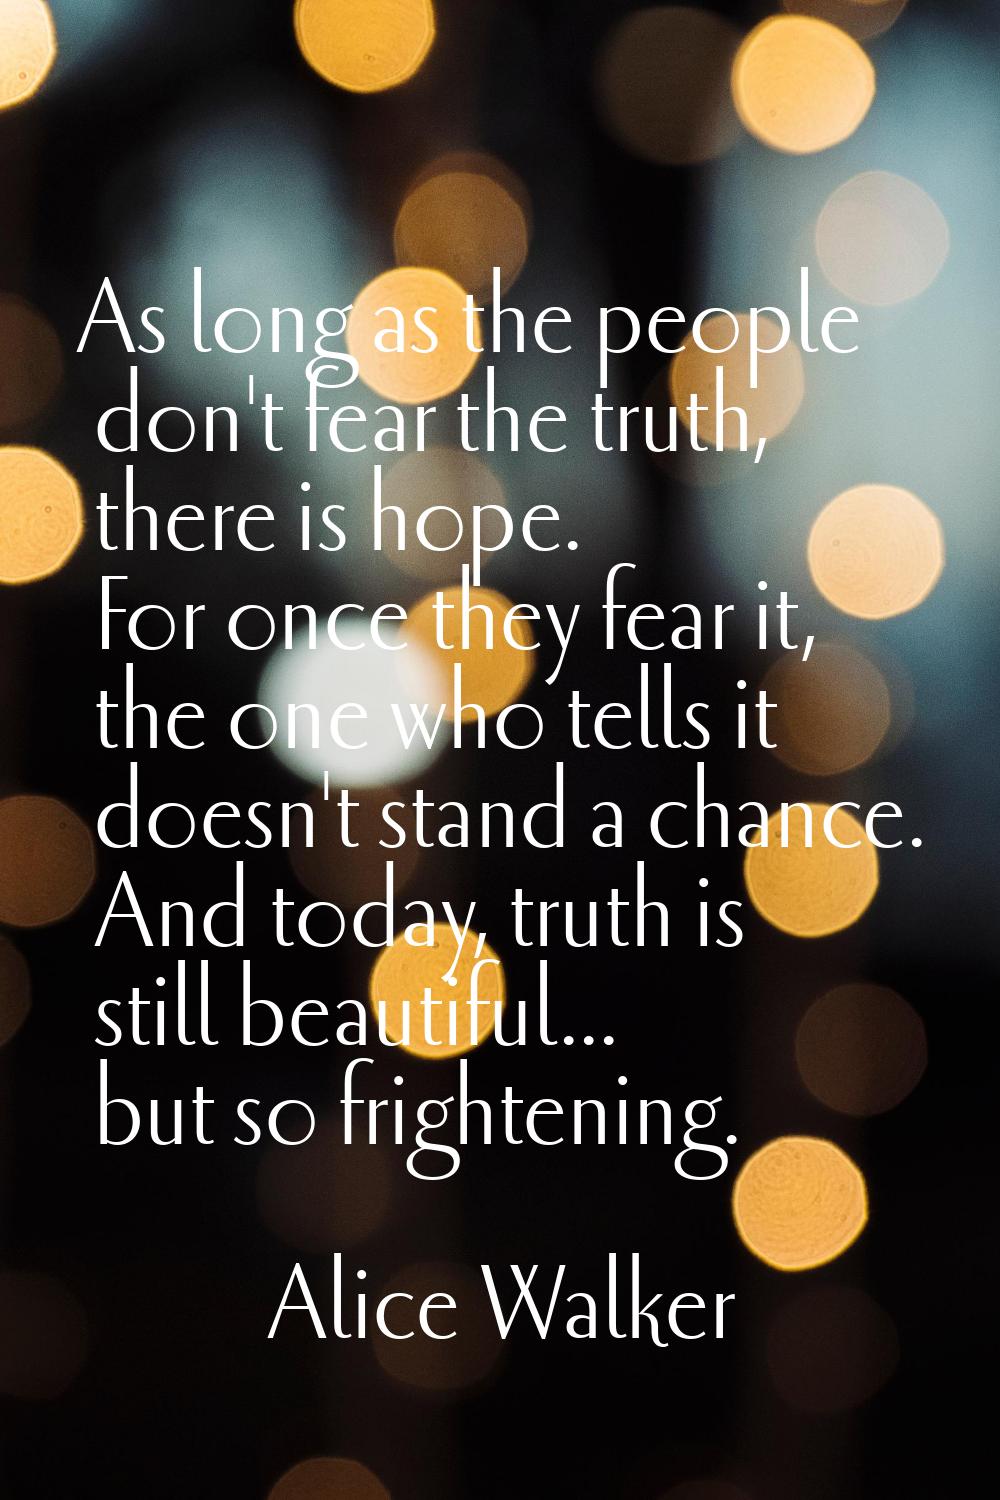 As long as the people don't fear the truth, there is hope. For once they fear it, the one who tells